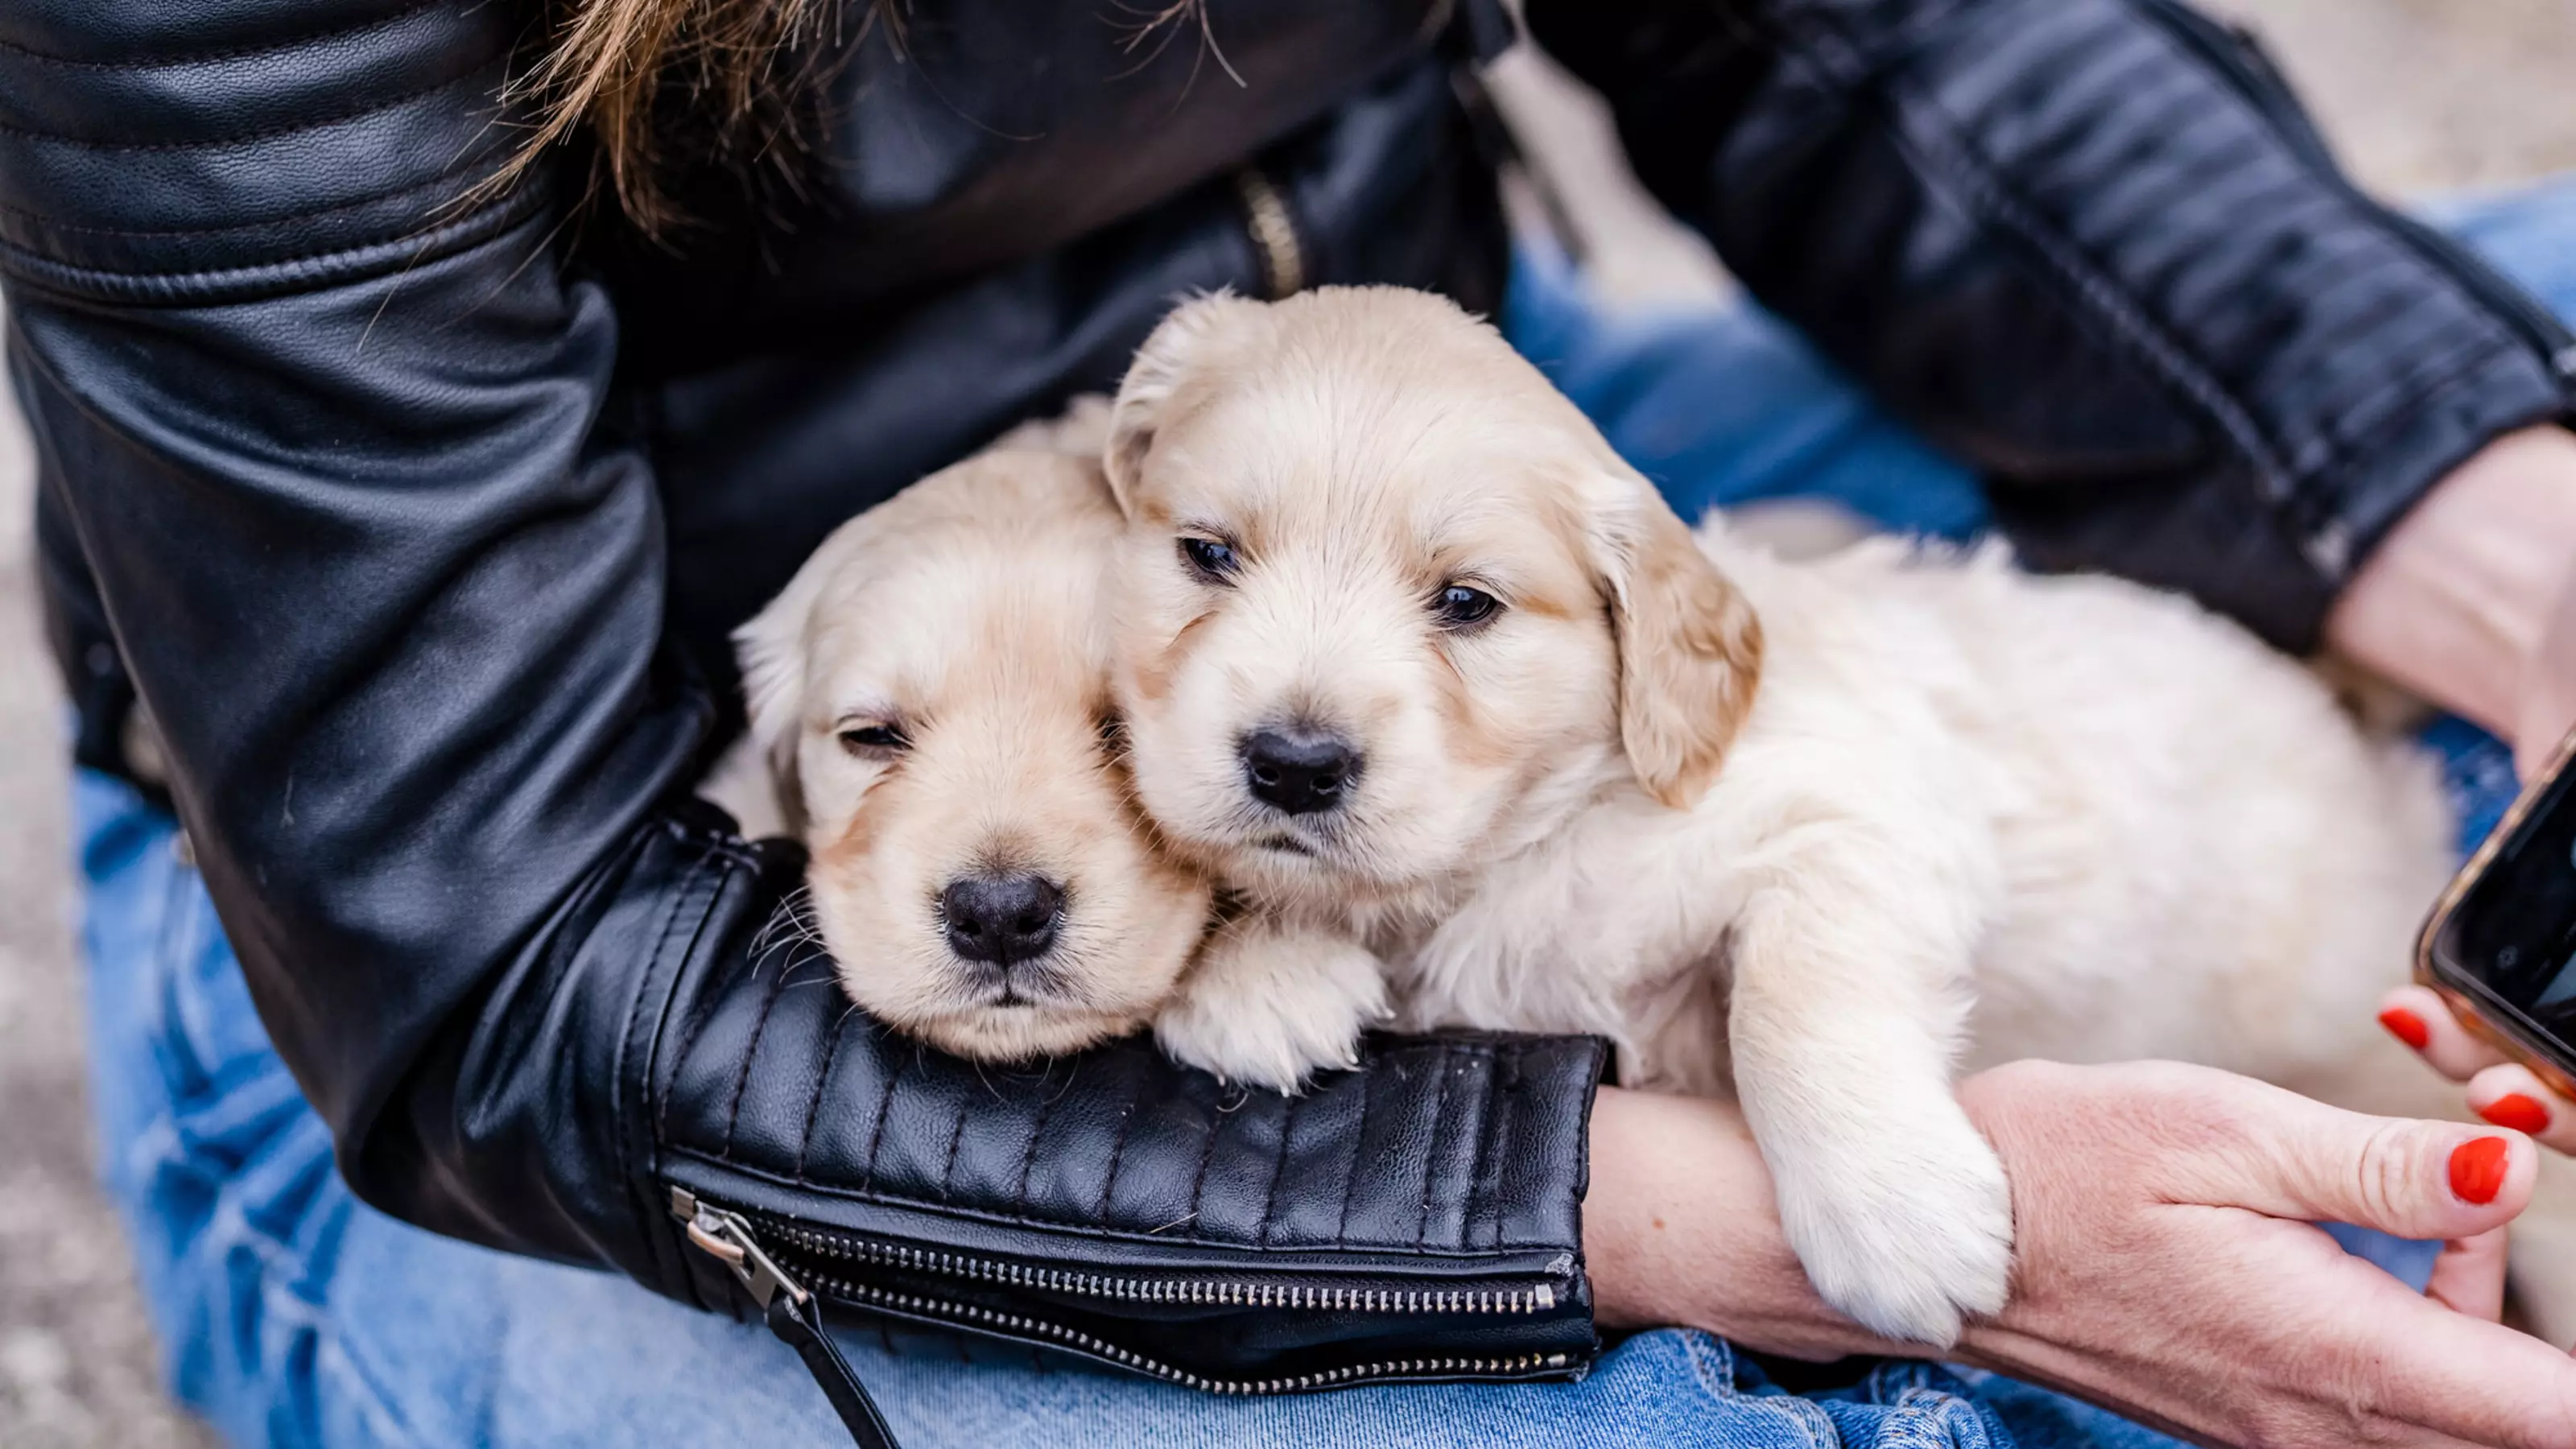 Two golden retriever puppies being held in a woman's arms